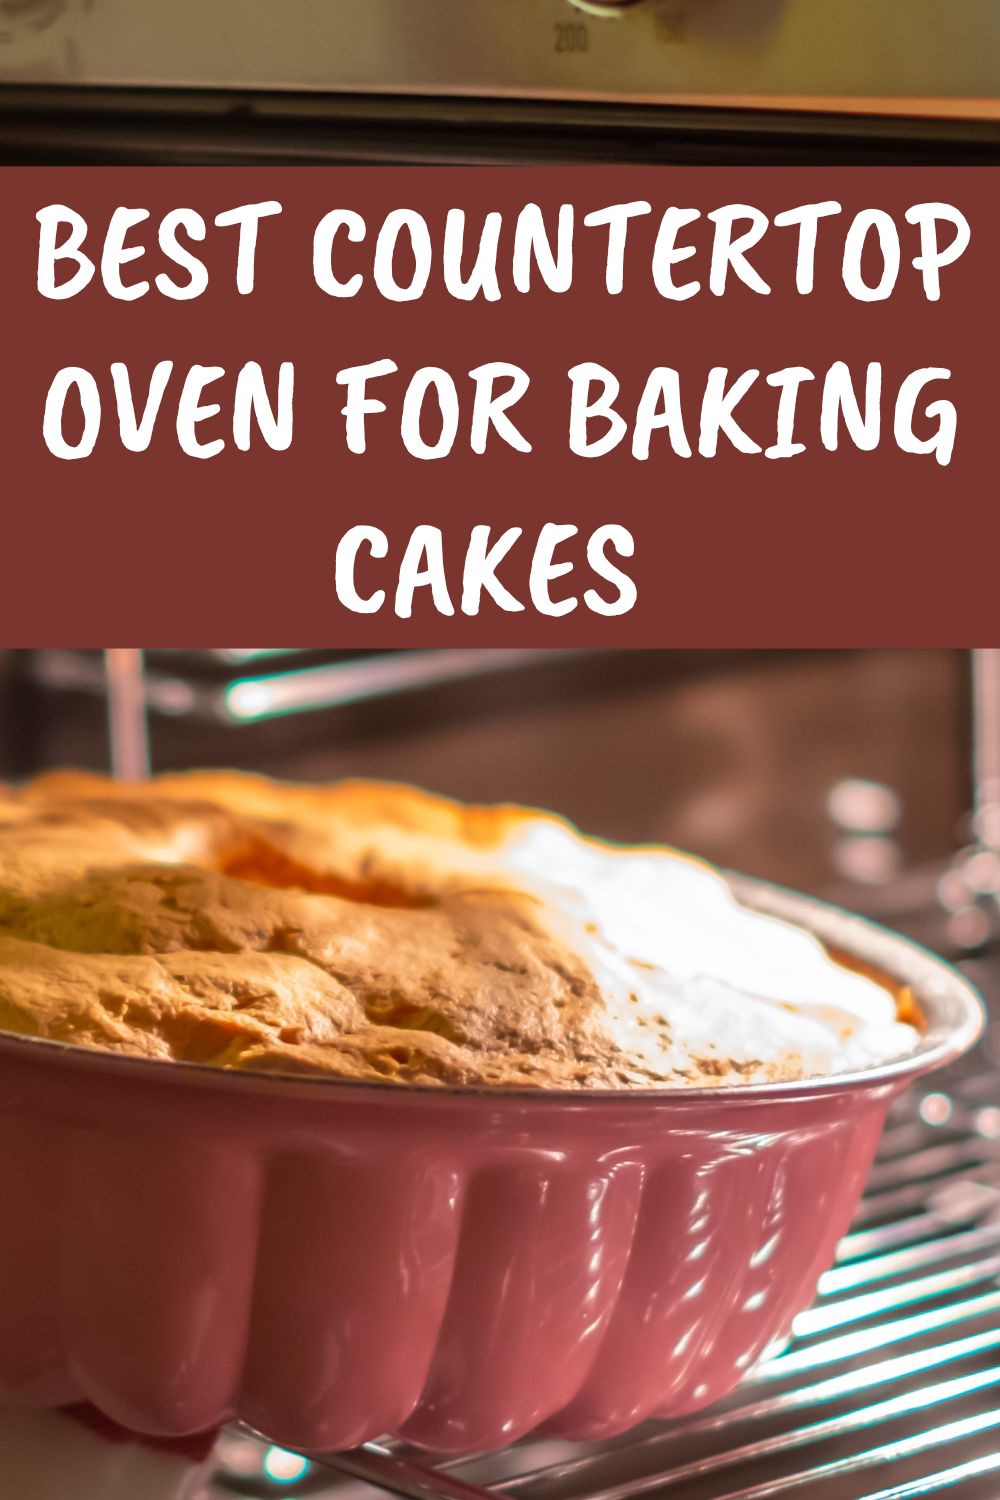 Best countertop oven for baking cakes.